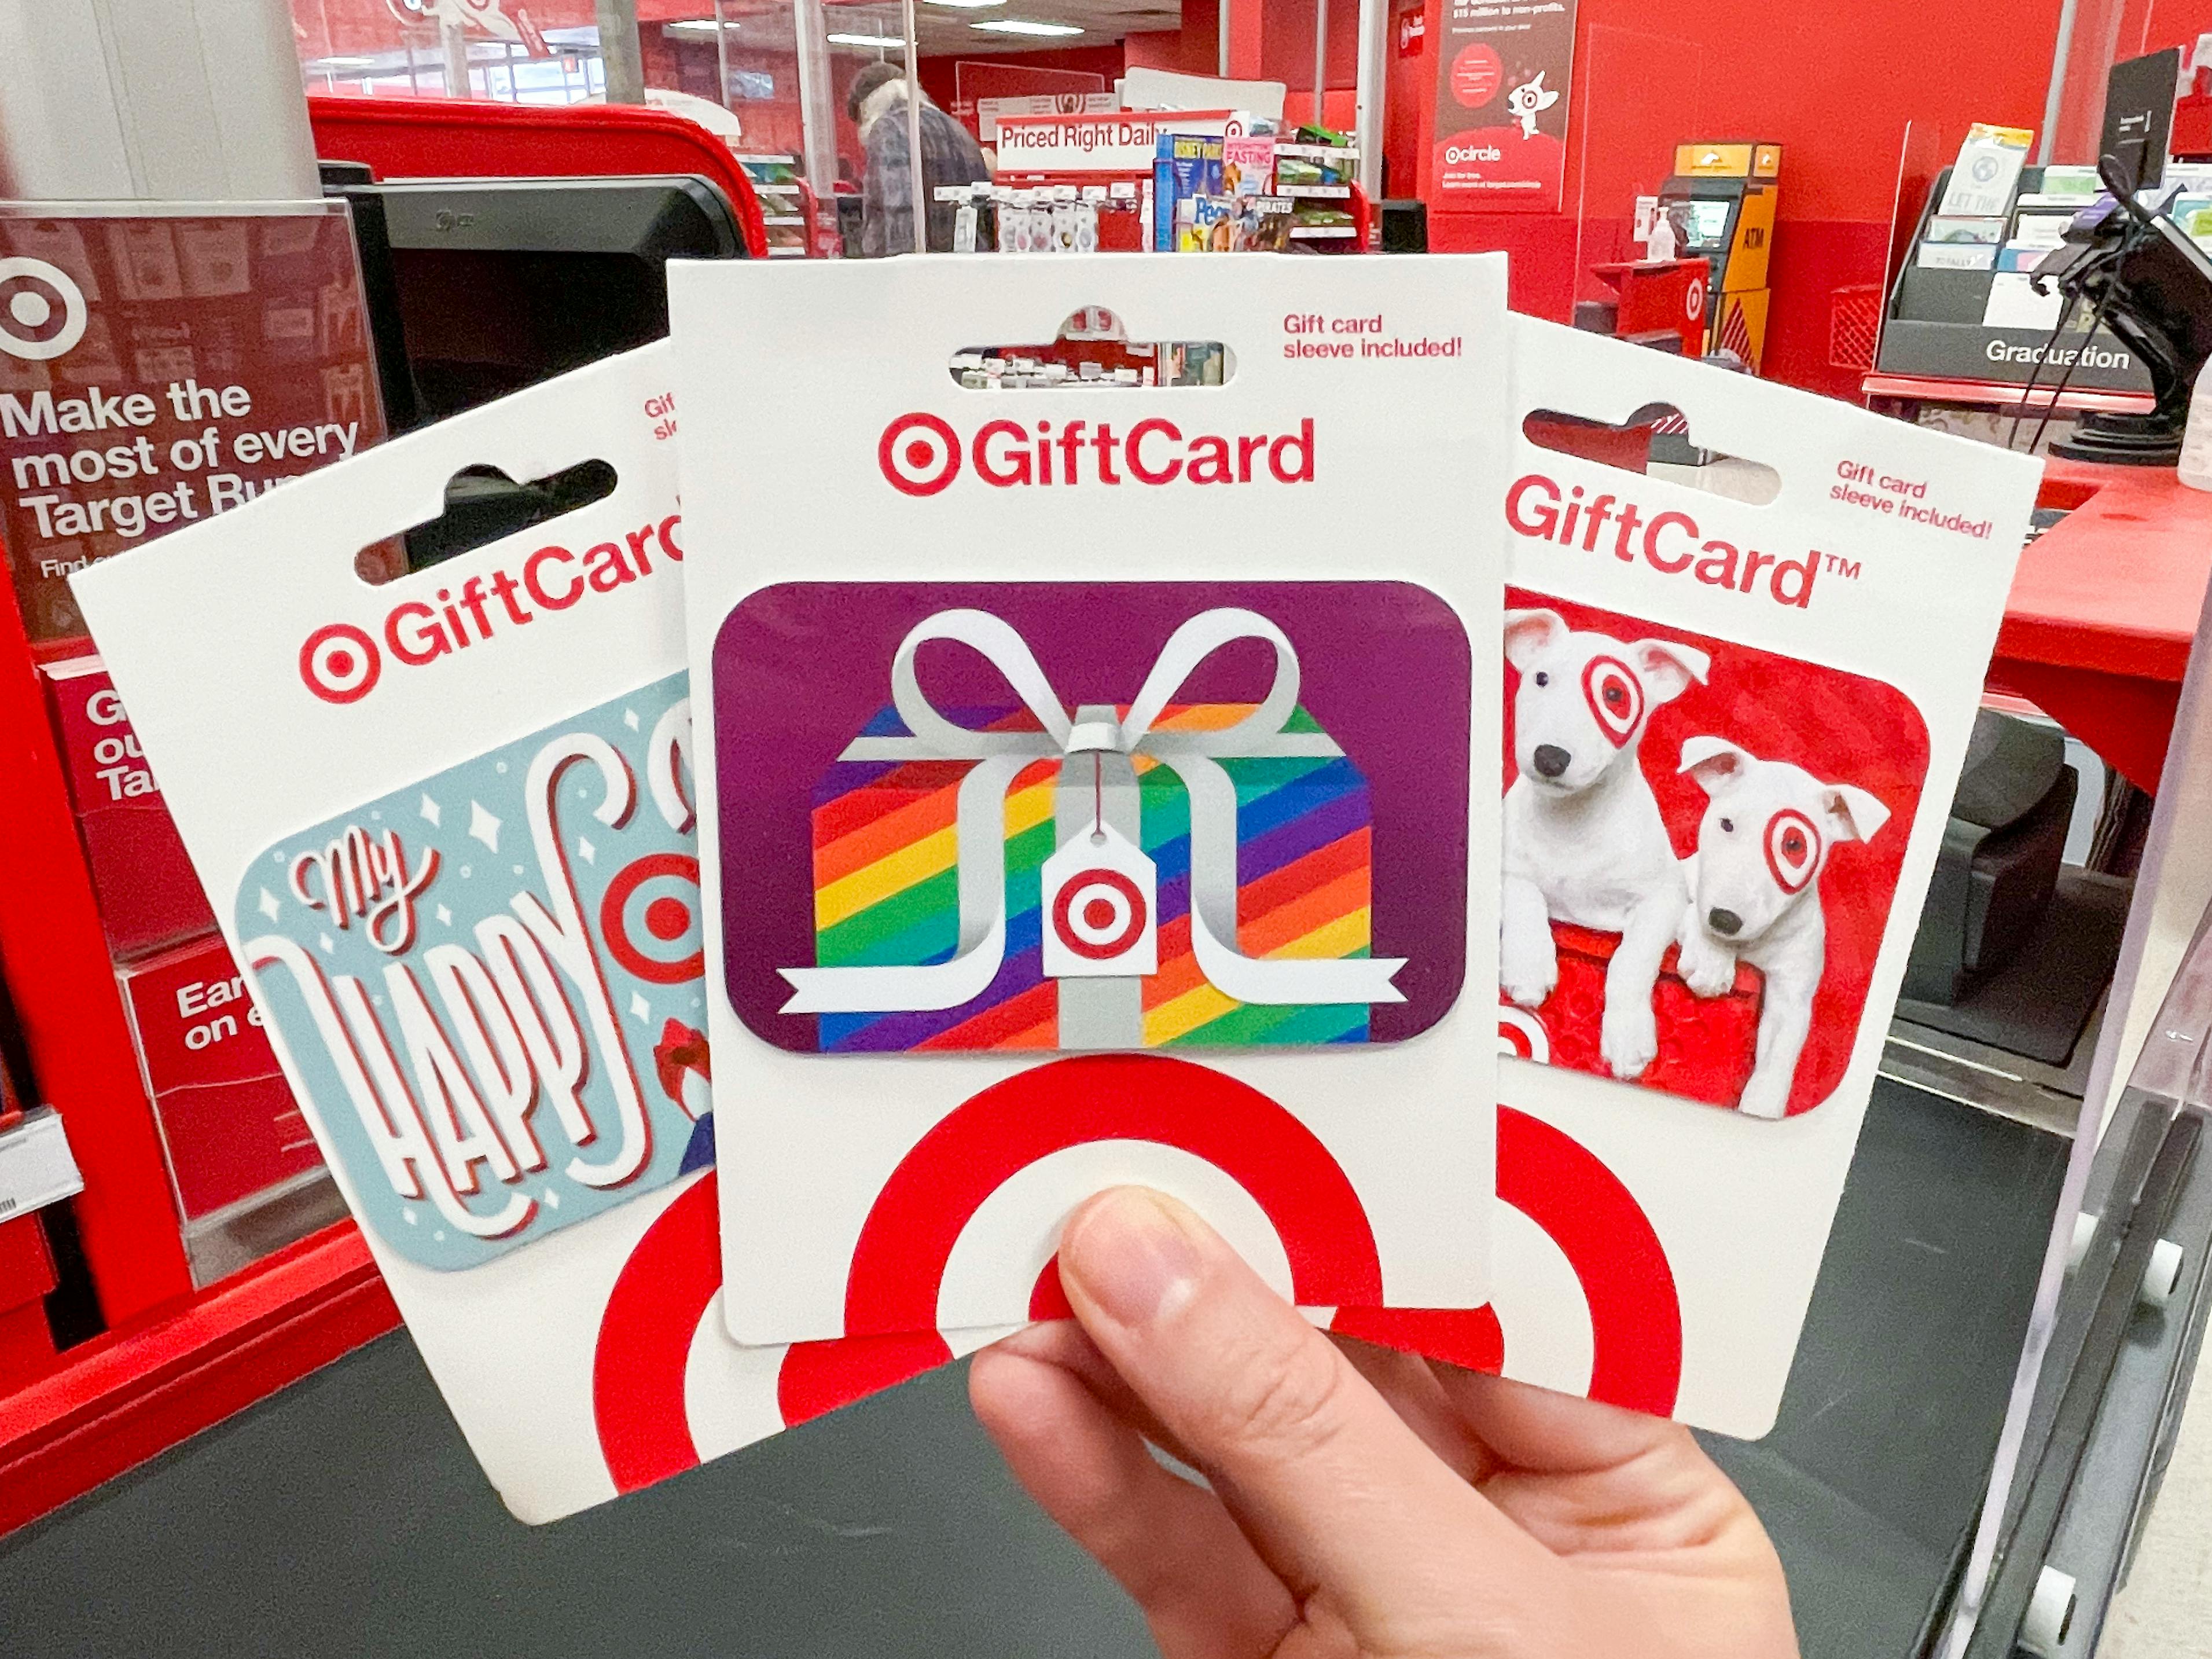 Three Target gift cards held in a persons hand at a checkout stand.